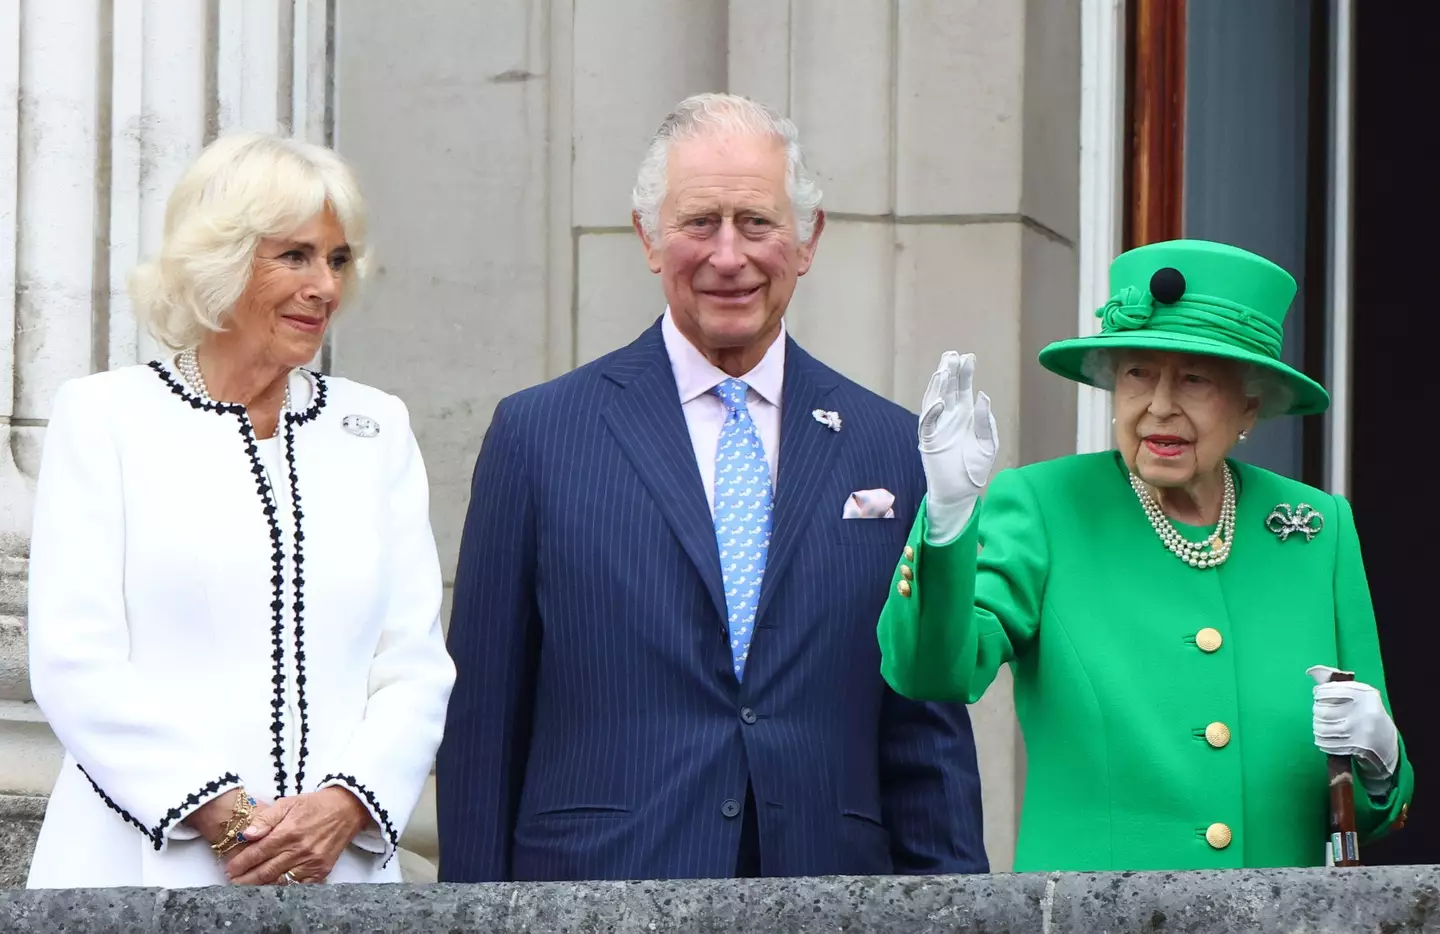 Queen Elizabeth confirmed Camilla's new title back in February.